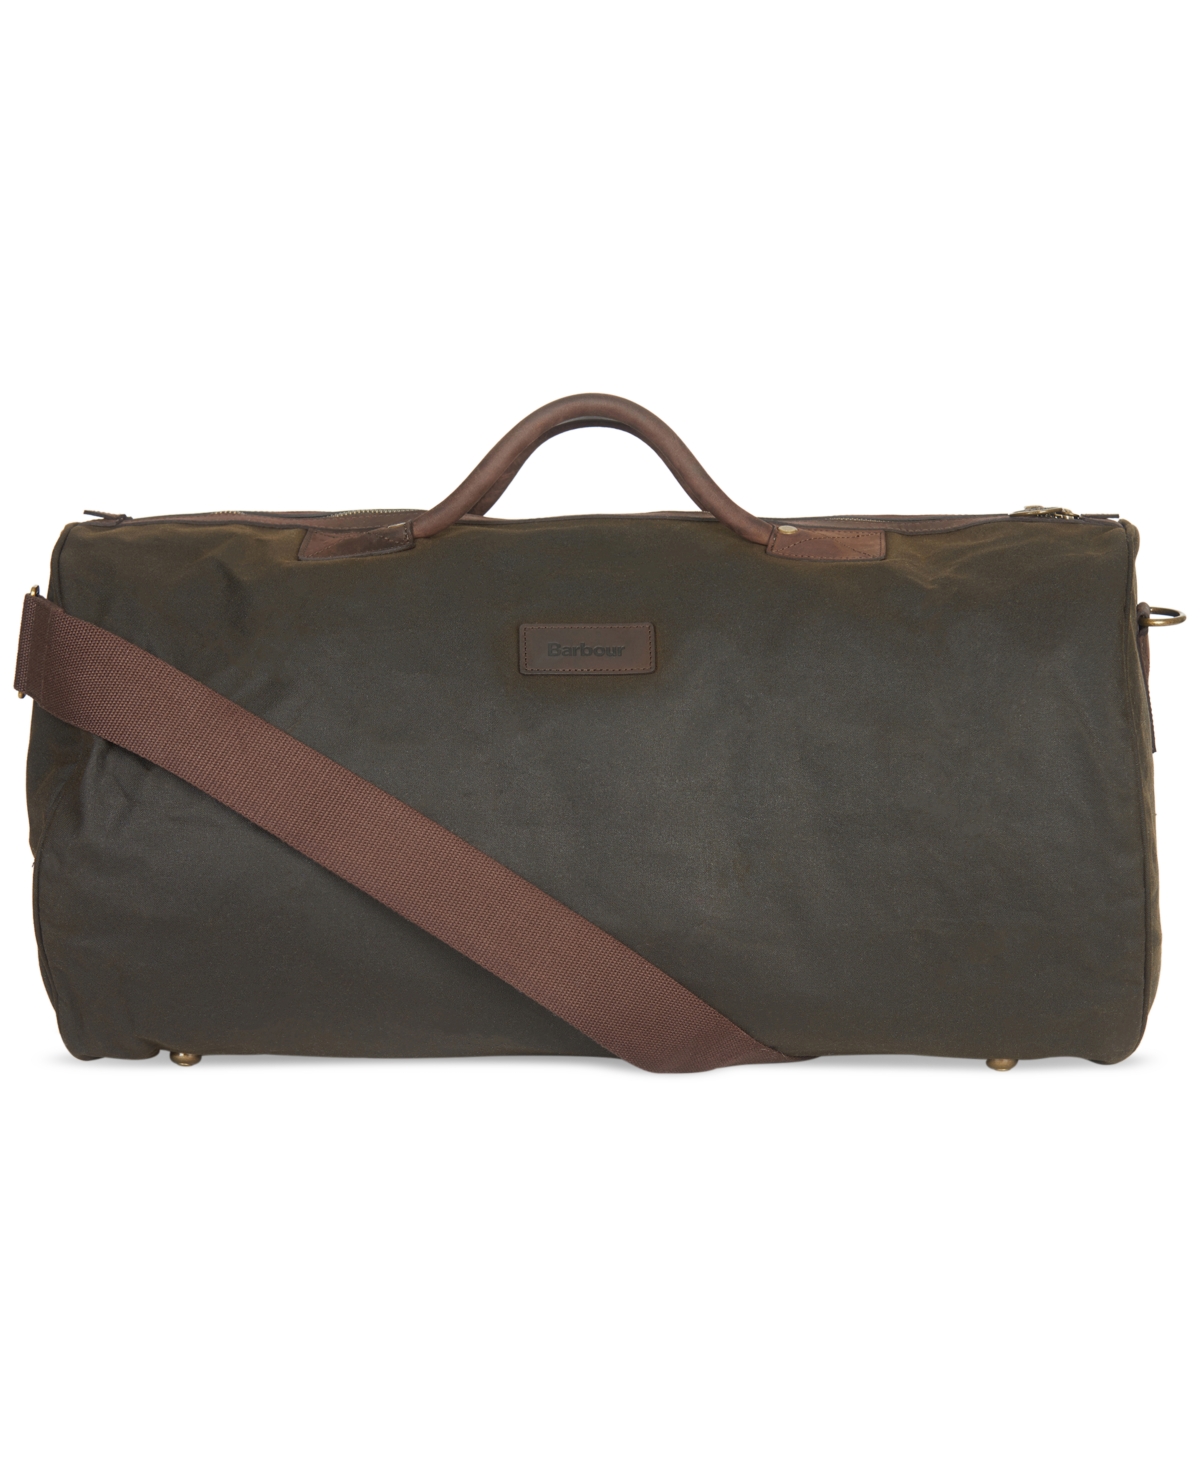 Men's Wax-Cotton Holdall Bag - Olive